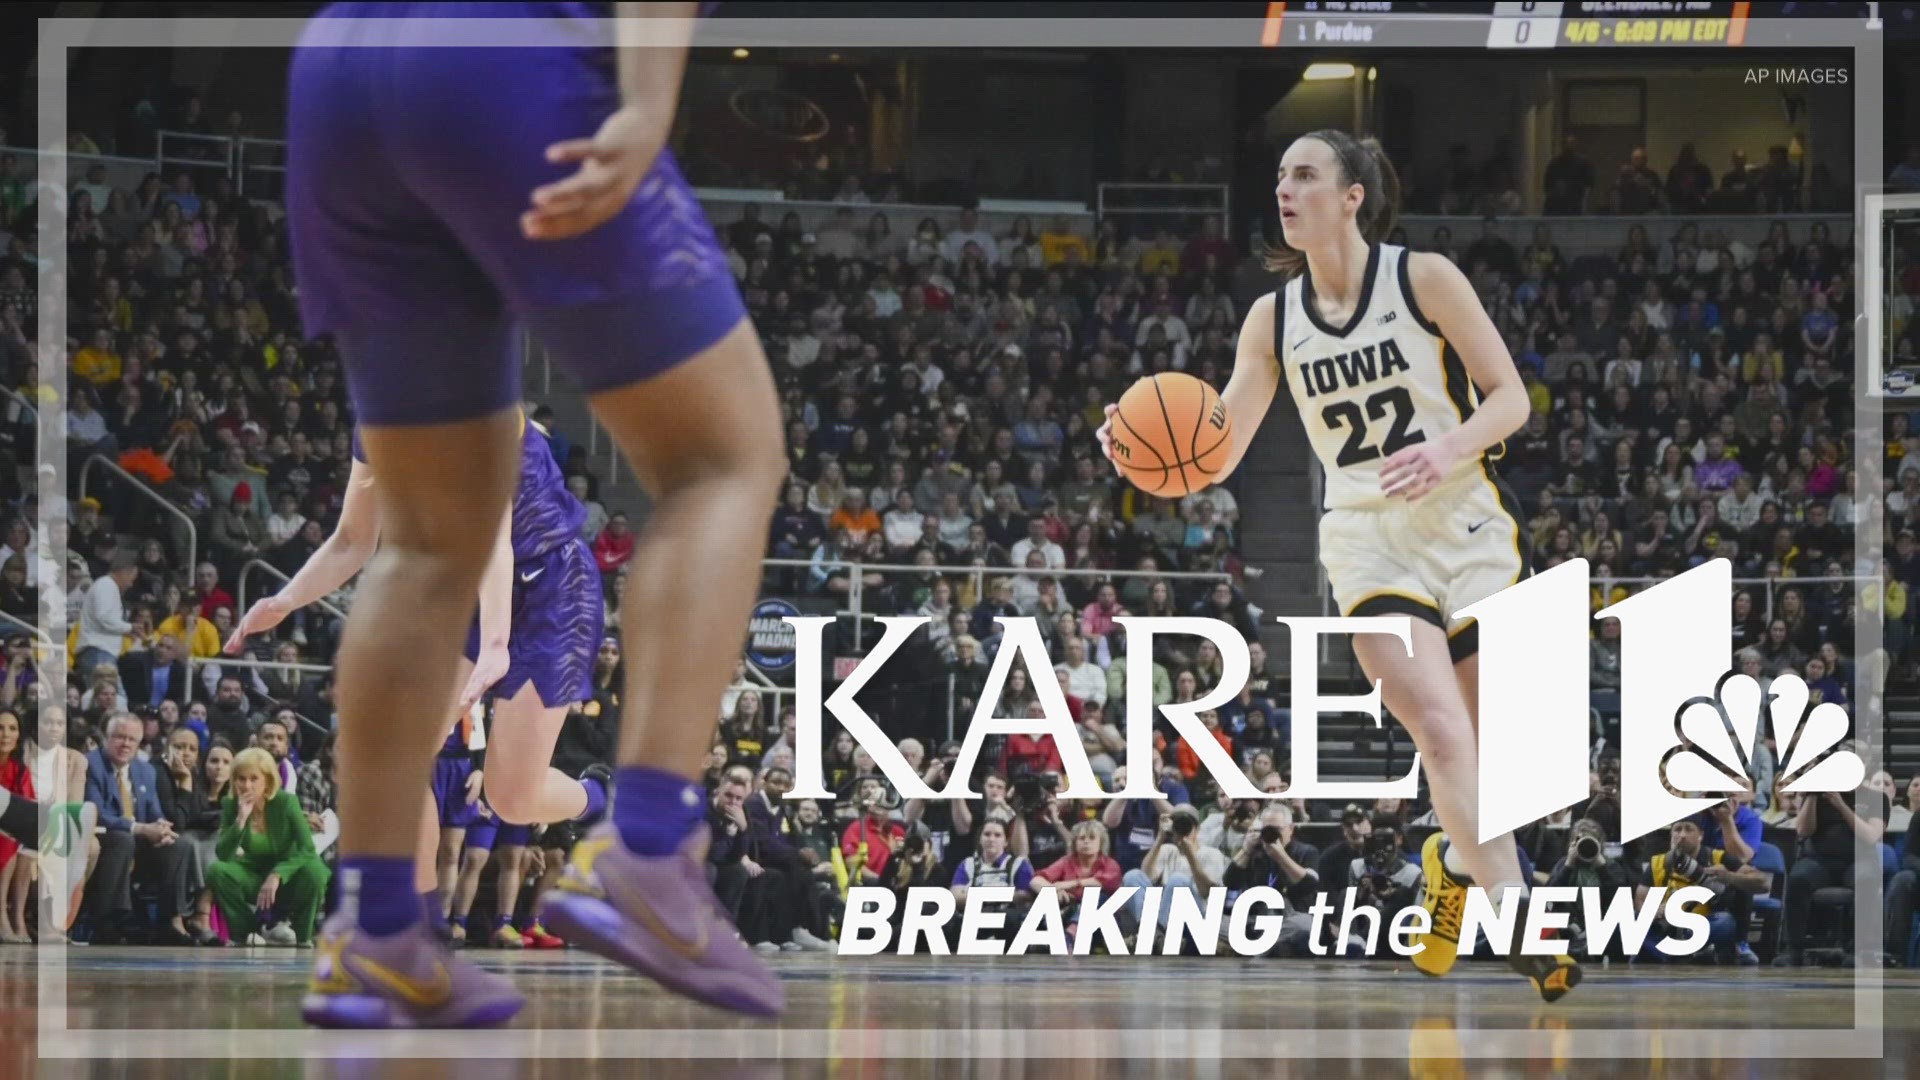 Iowa star Caitlin Clark has been stealing the spotlight as of late, but there have been several stars that have paved the way for women's sports.